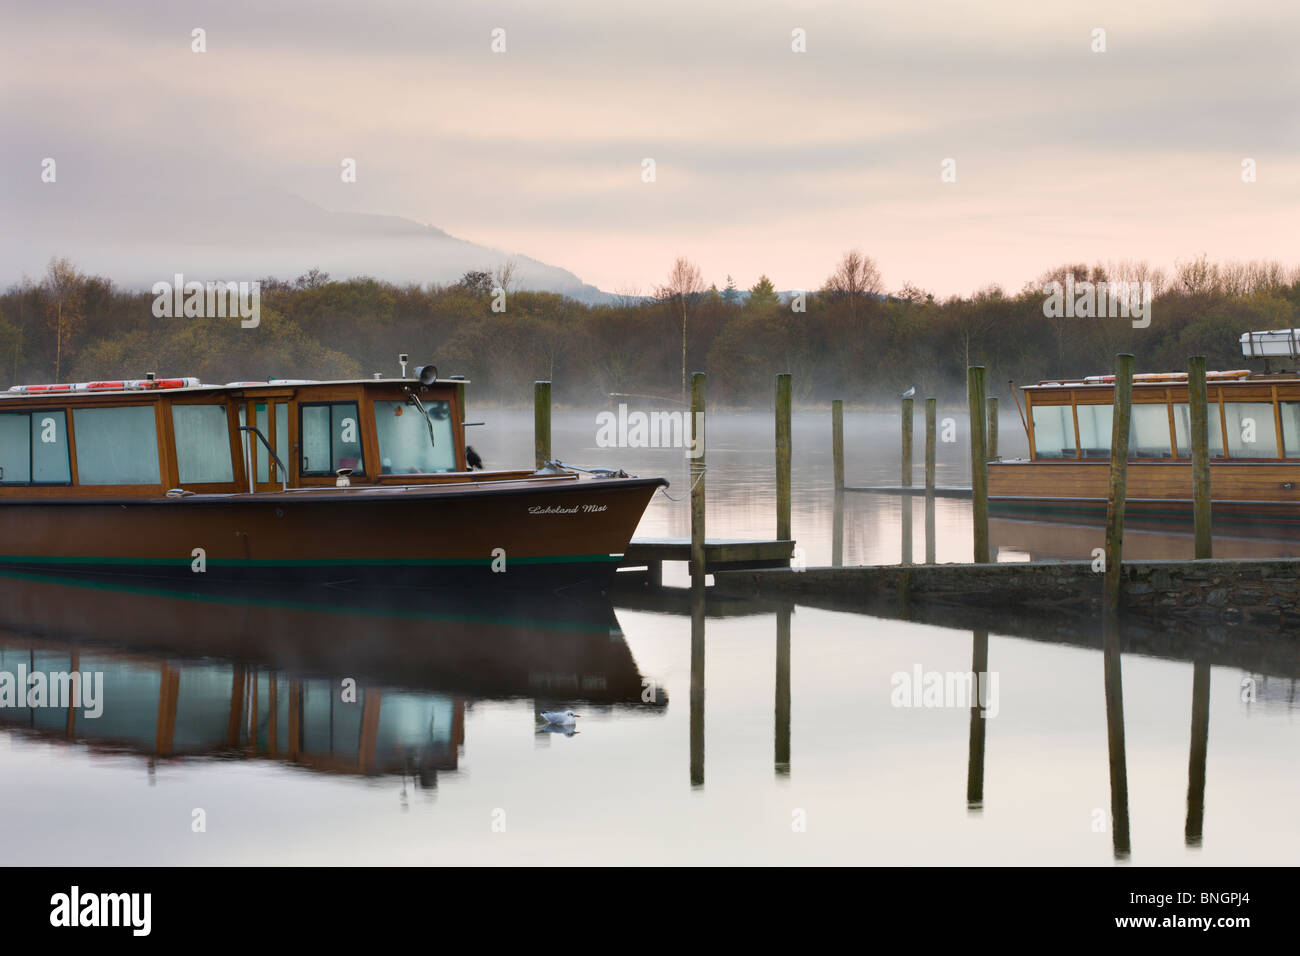 Lakeland Mist boat moored on Derwent Water on a frosty and misty autumn morning, Keswick, Lake District National Park, Cumbria. Stock Photo